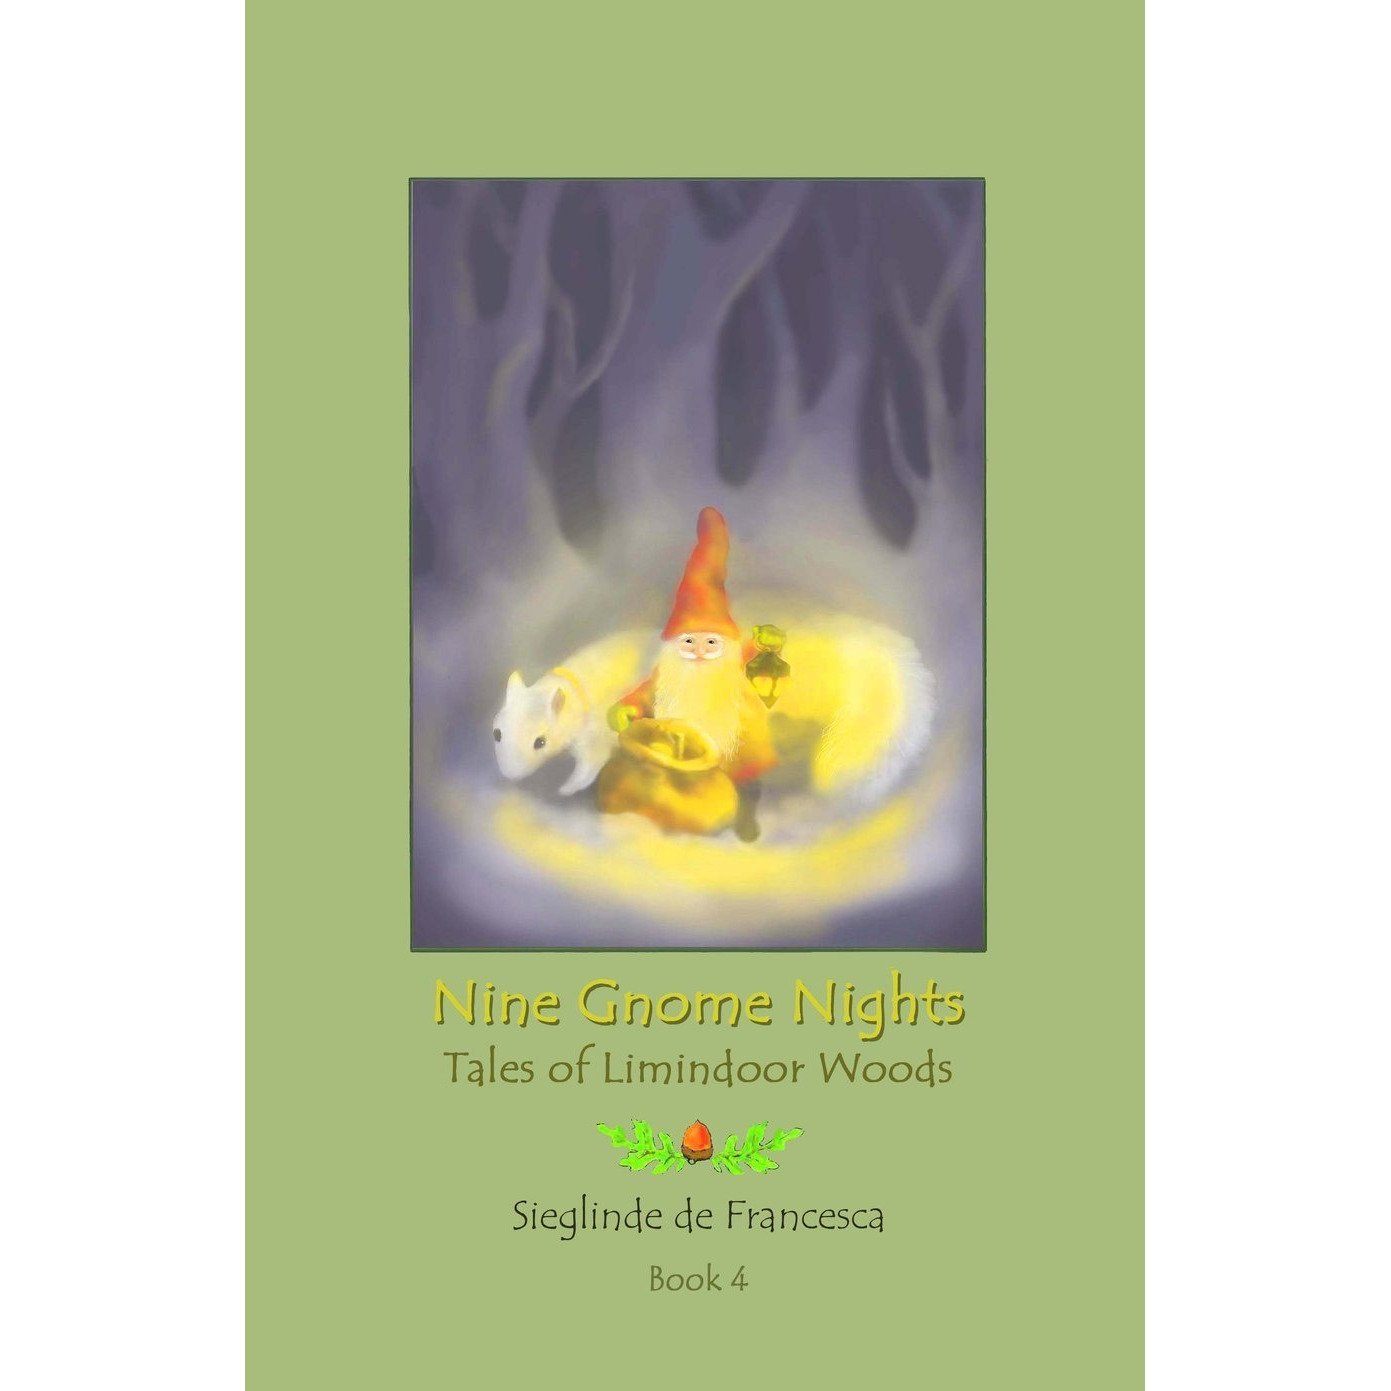 Nine Gnome Nights, The Tales of Limindoor Woods - Alder & Alouette